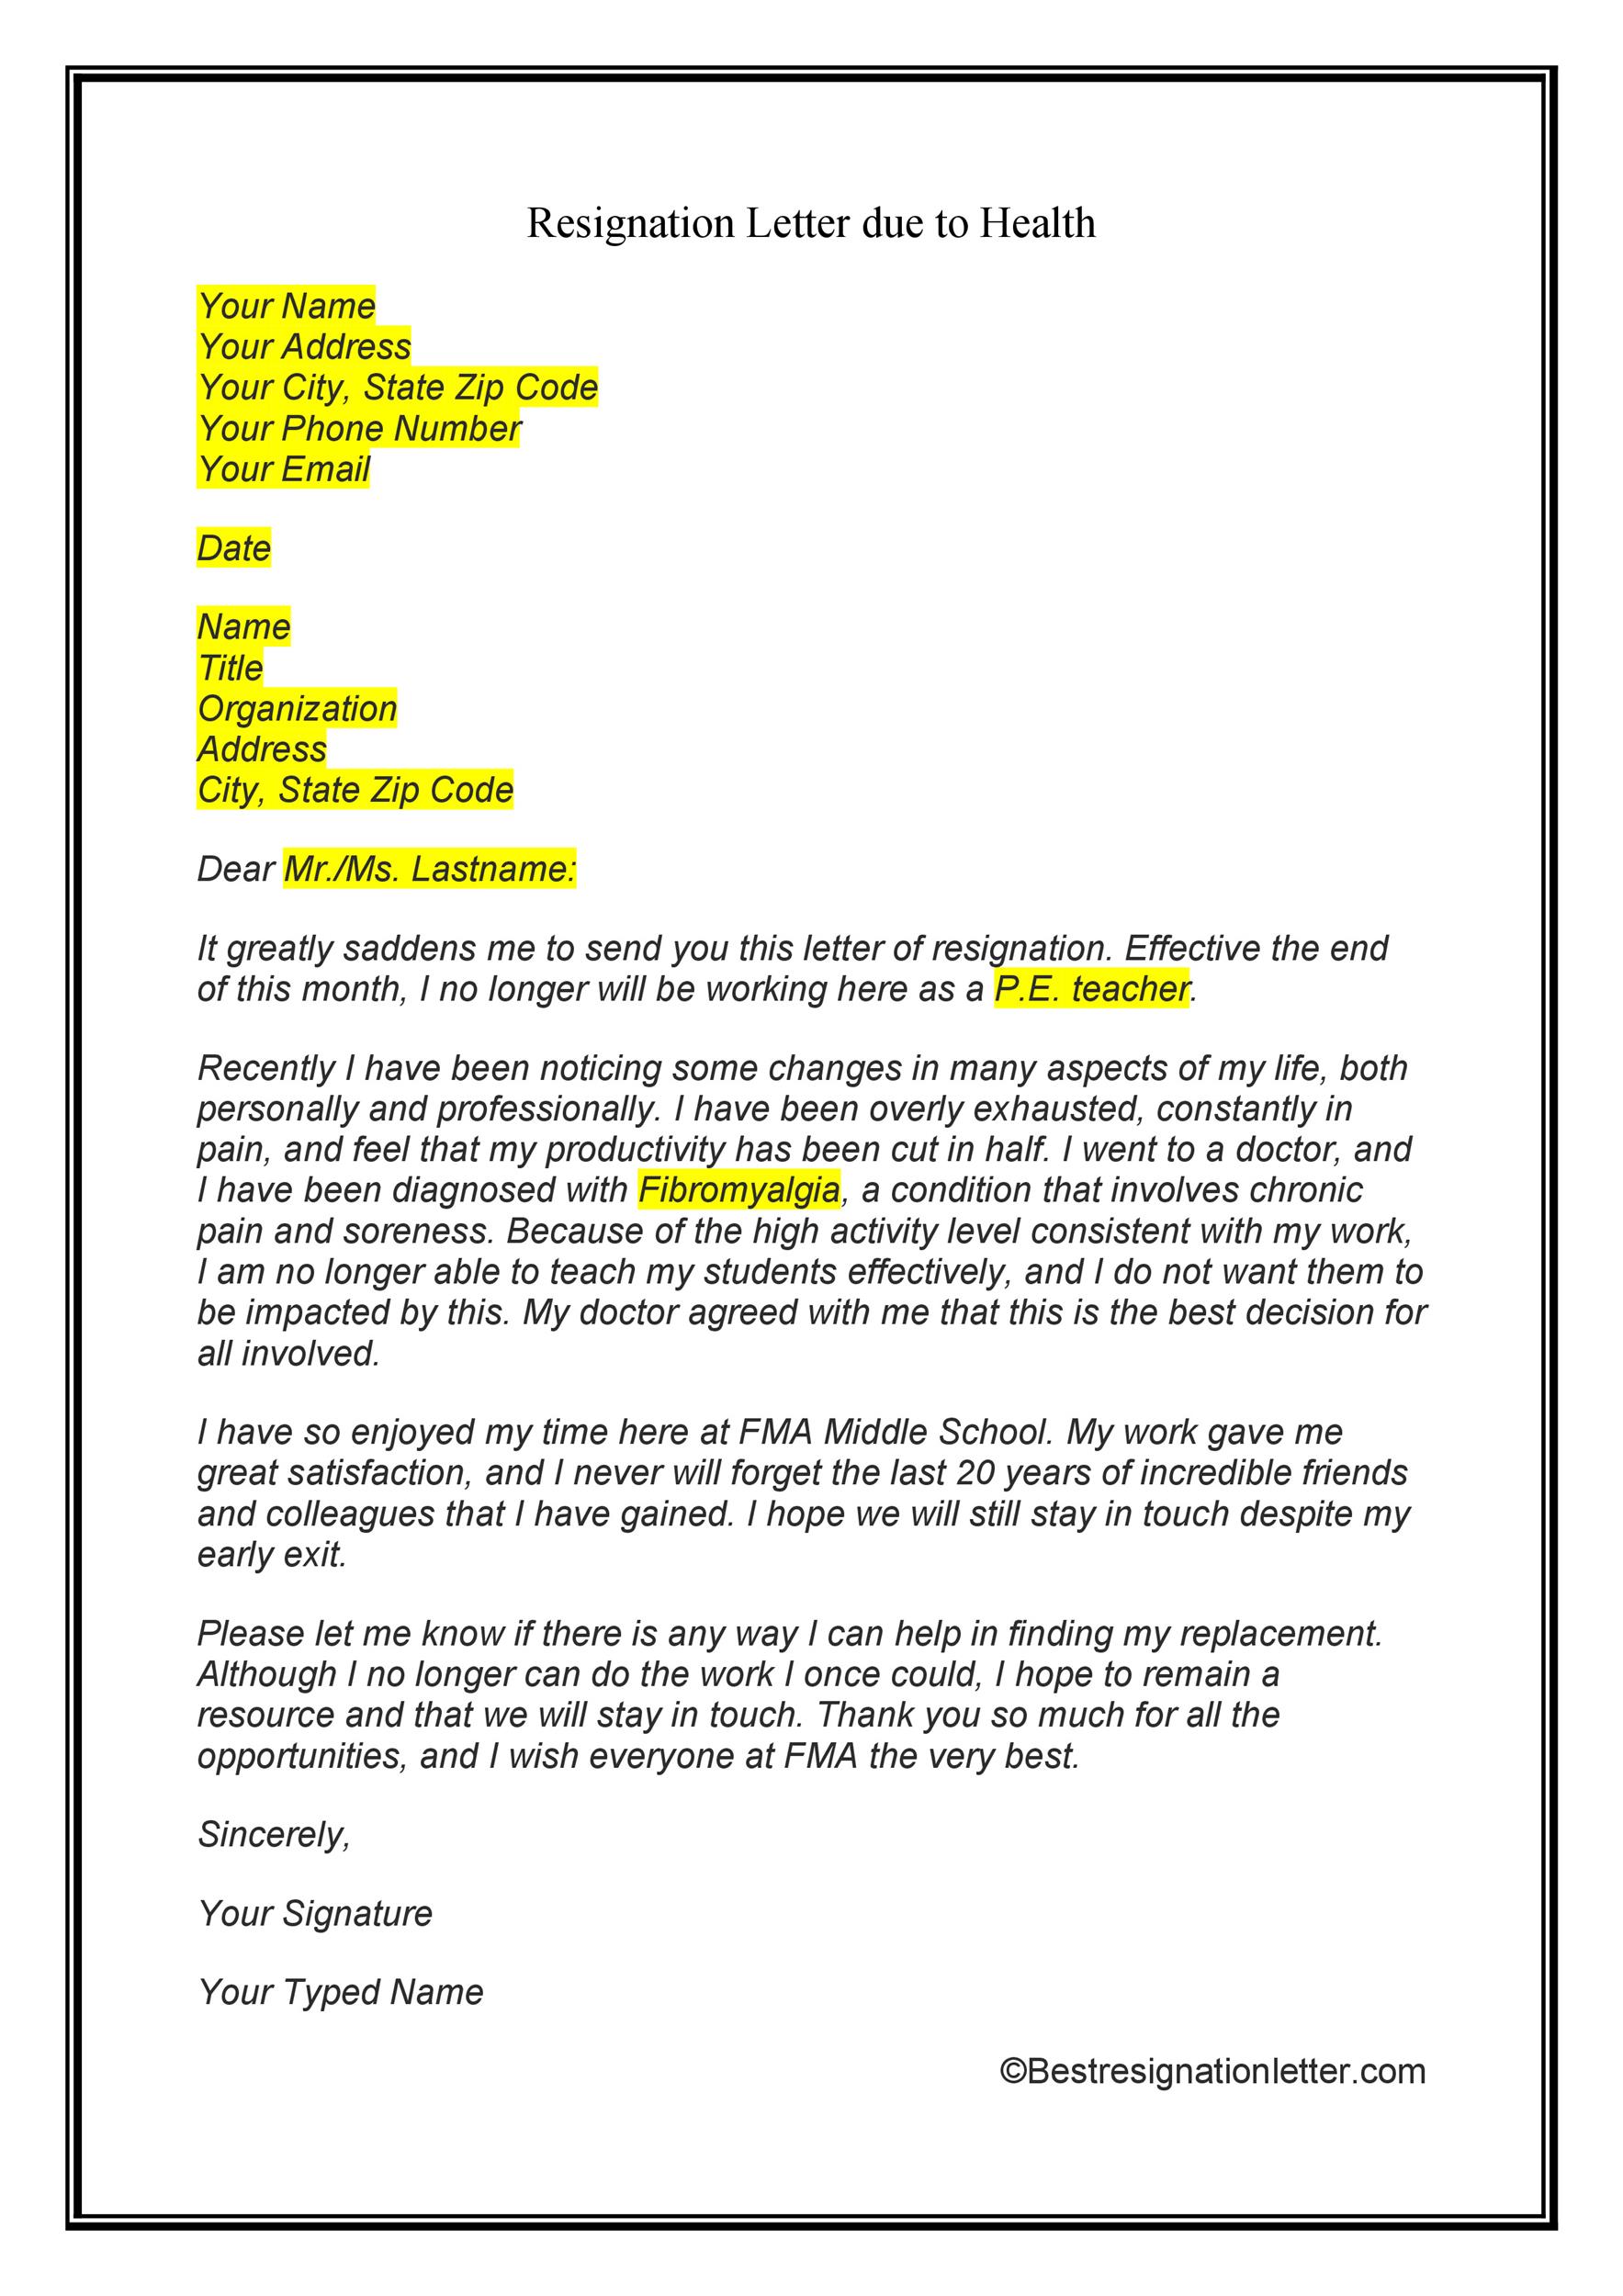 Resignation Letter For Health Reasons Pdf For Your Needs